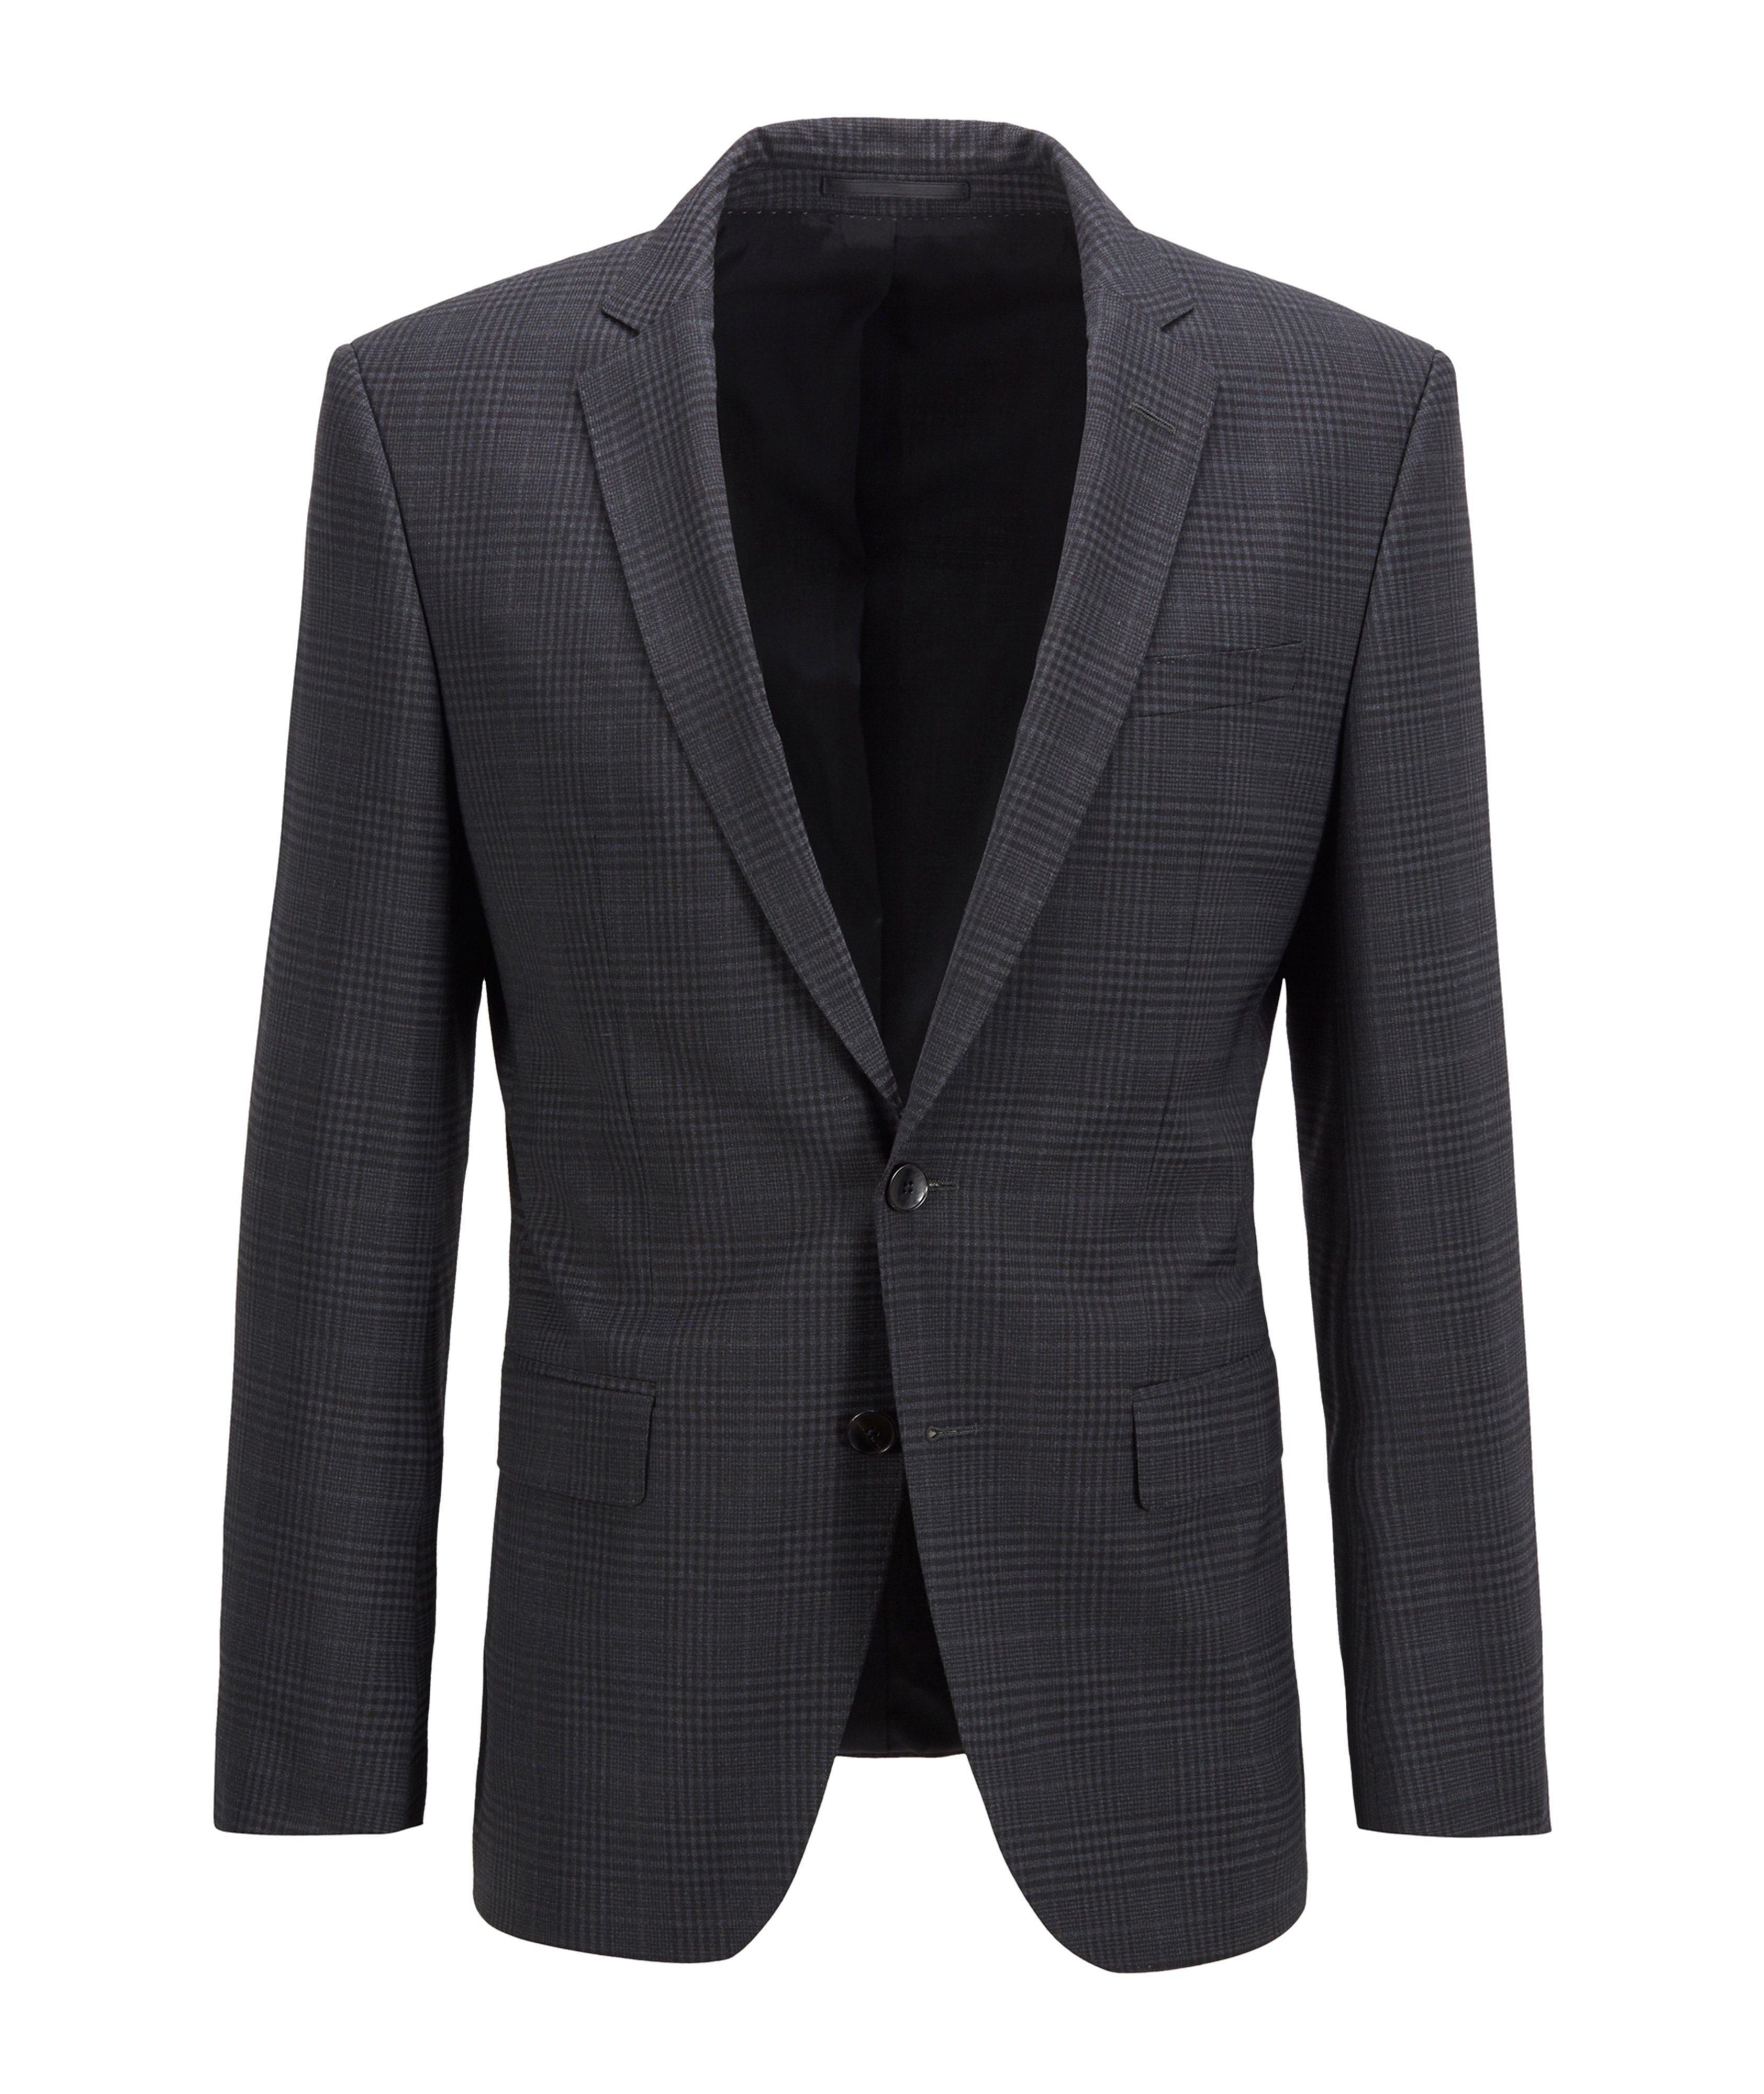 Slim-Fit Micro-Checked Stretch-Wool Sports Jacket image 0